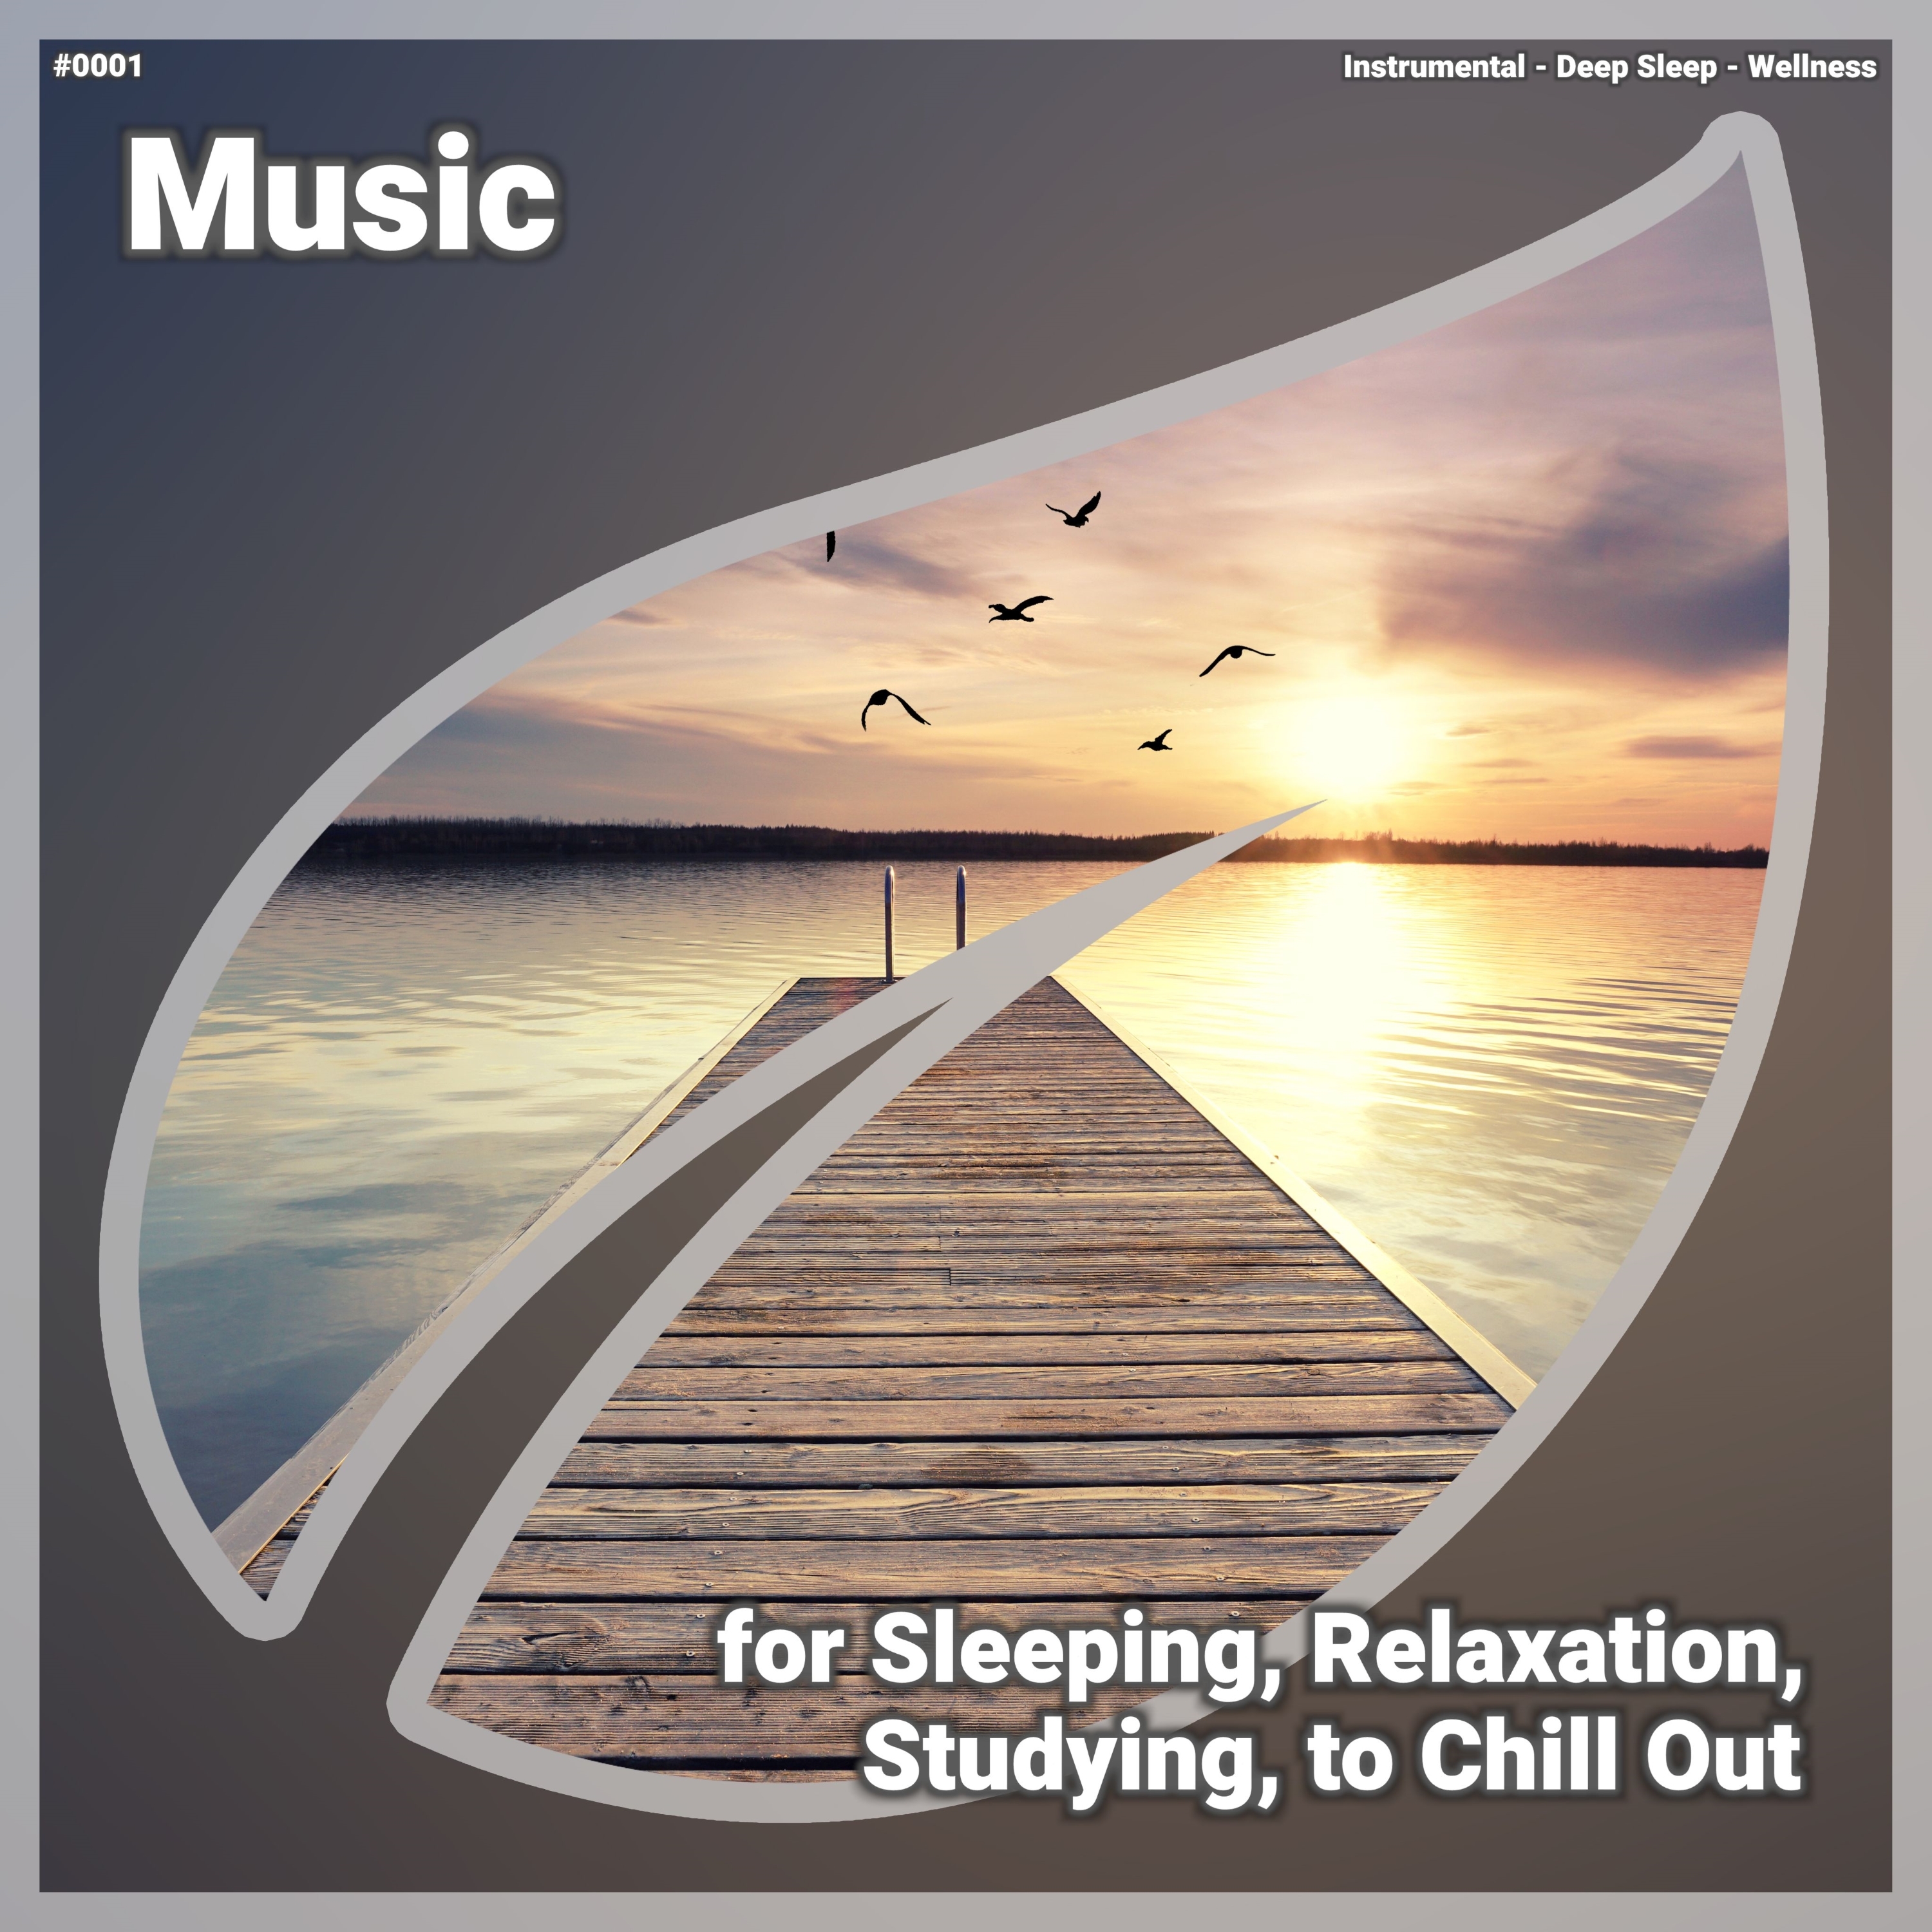 I-download Relaxing Music, Pt. 7